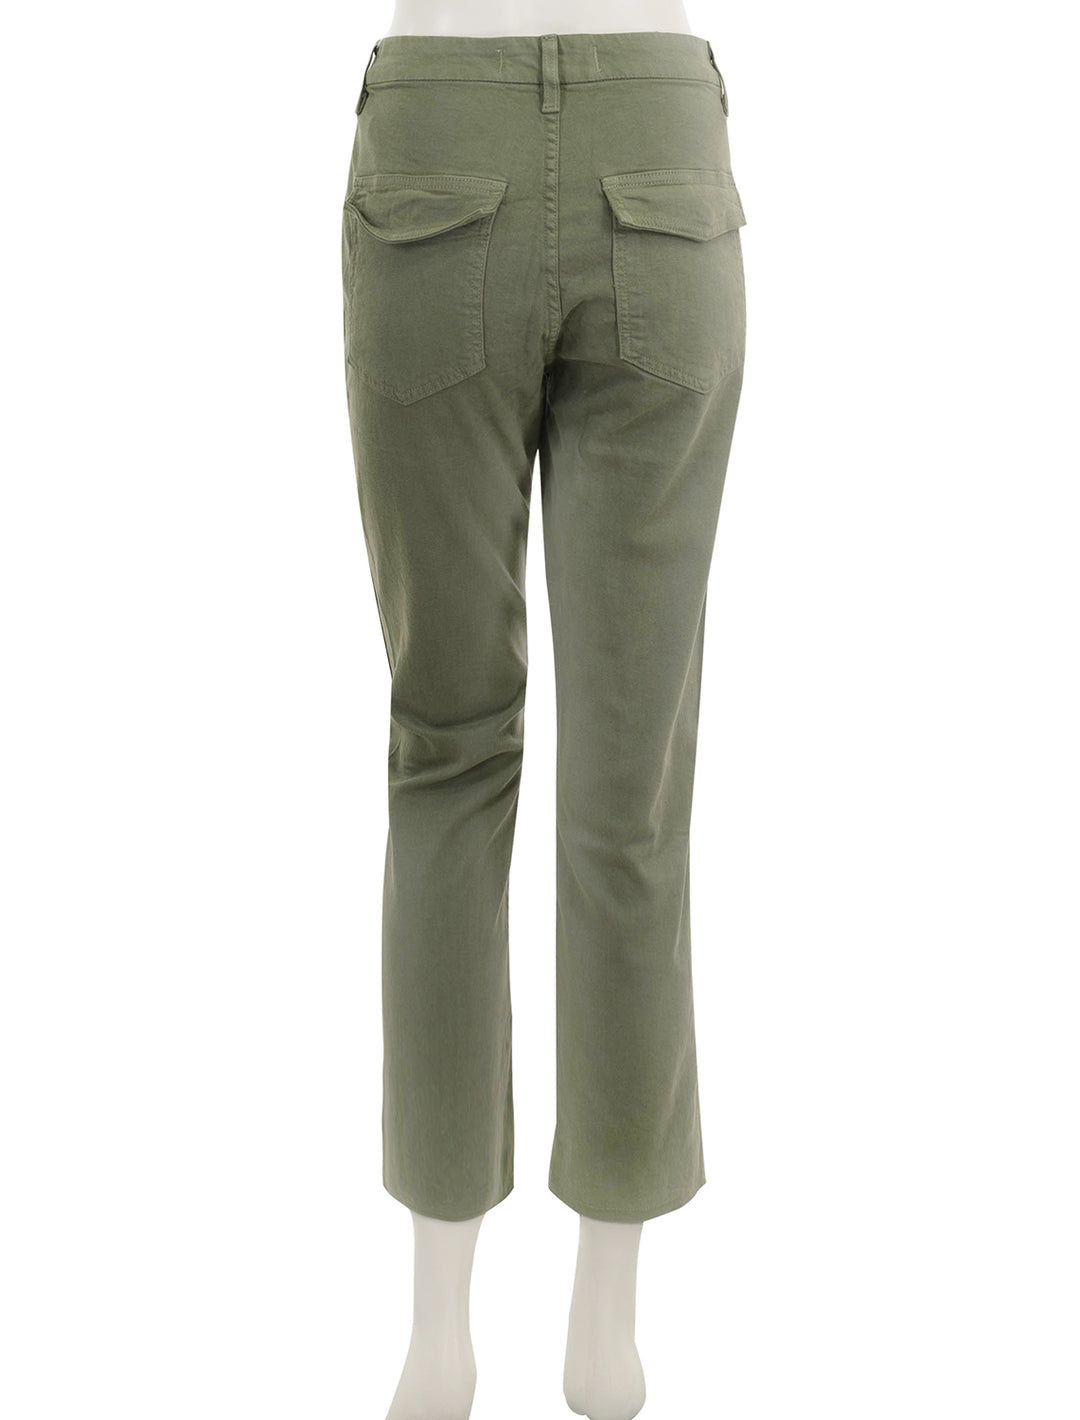 back view of easy army trouser in tea leaf